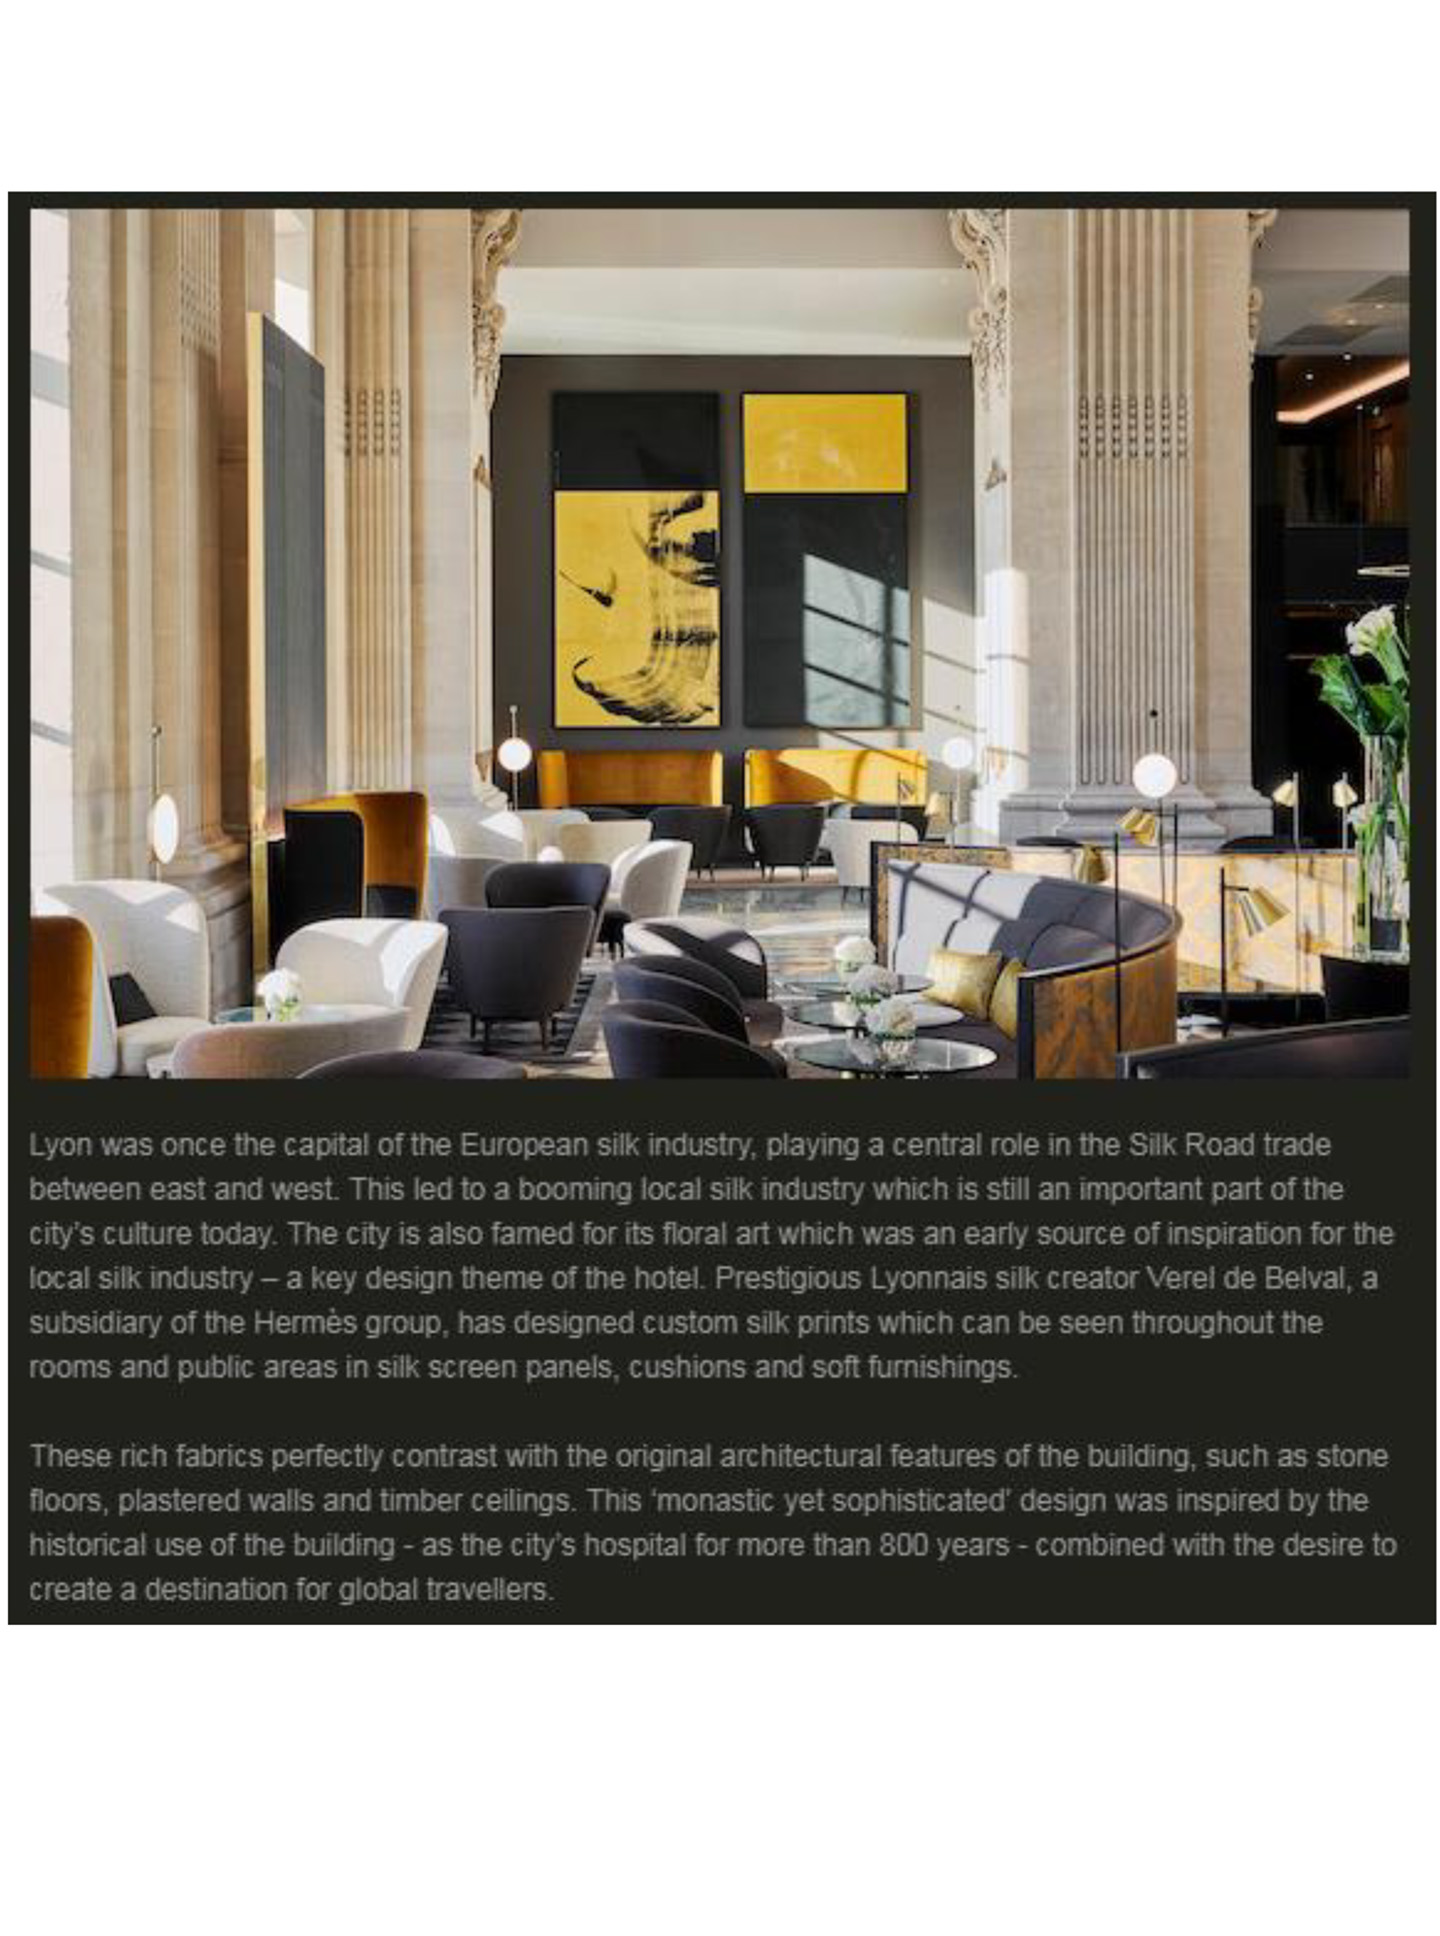 Article on the InterContinental Lyon Hotel Dieu realized by the studio jean-Philippe Nuel in the rooms magazine, new luxury hotel, luxury interior design, historical heritage